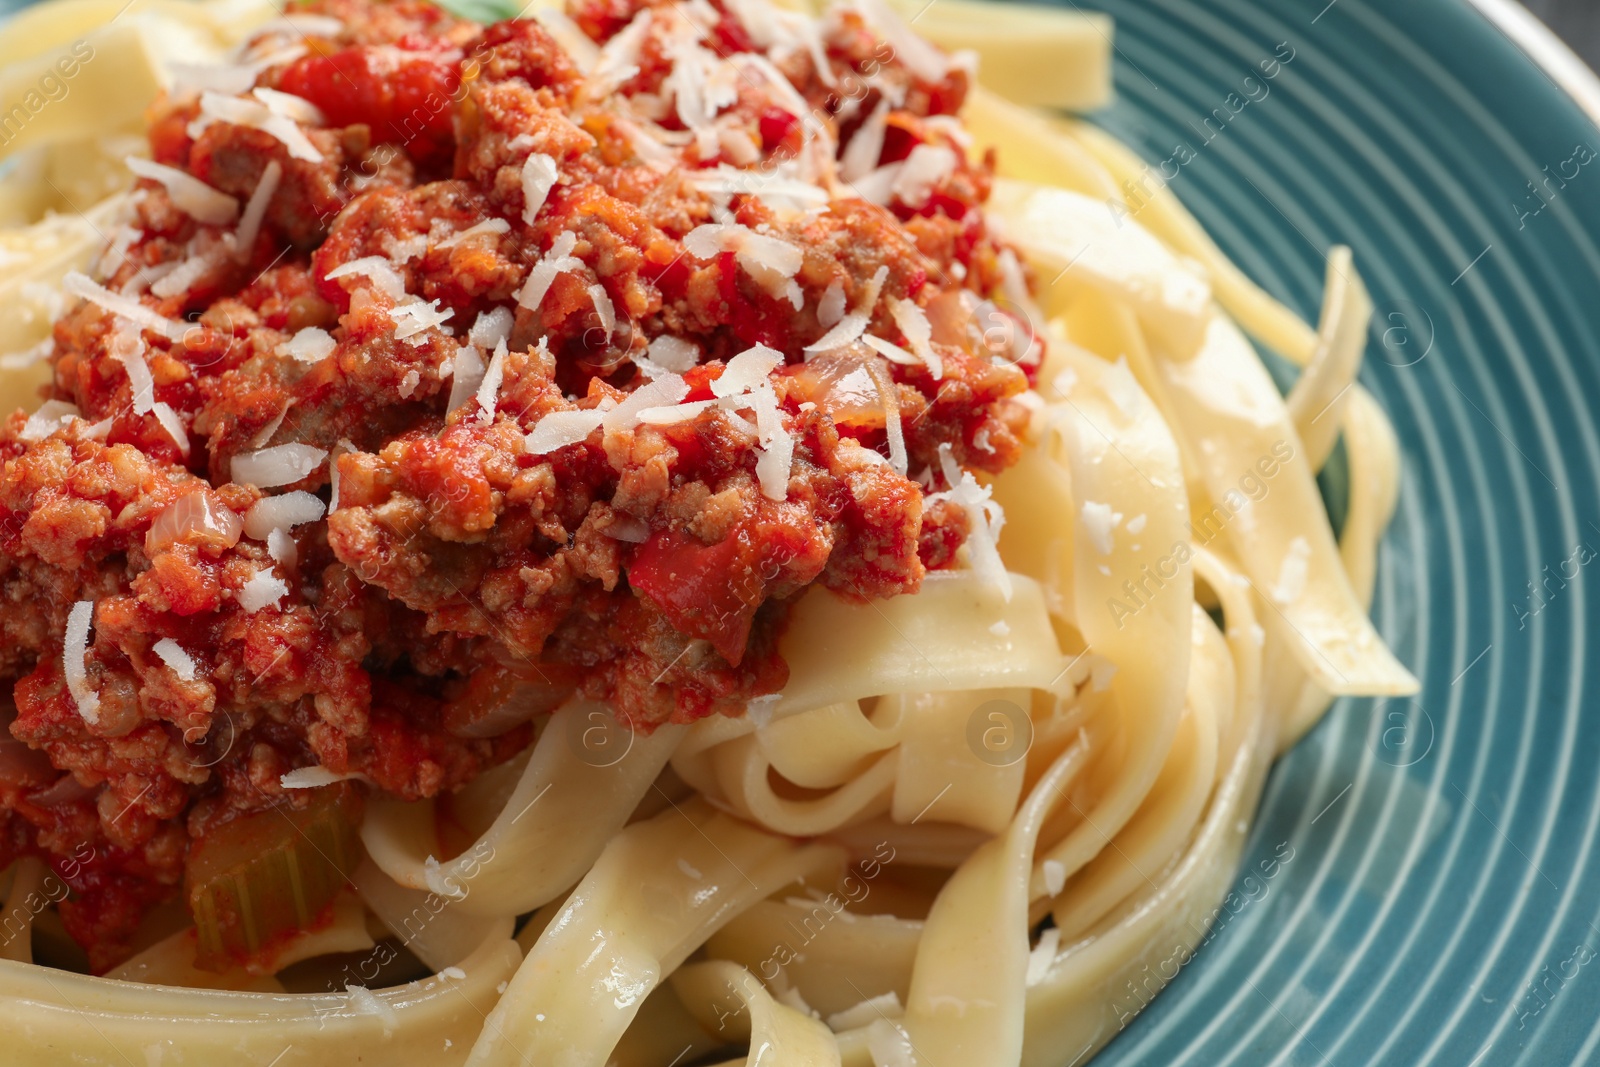 Photo of Plate with delicious pasta bolognese, closeup